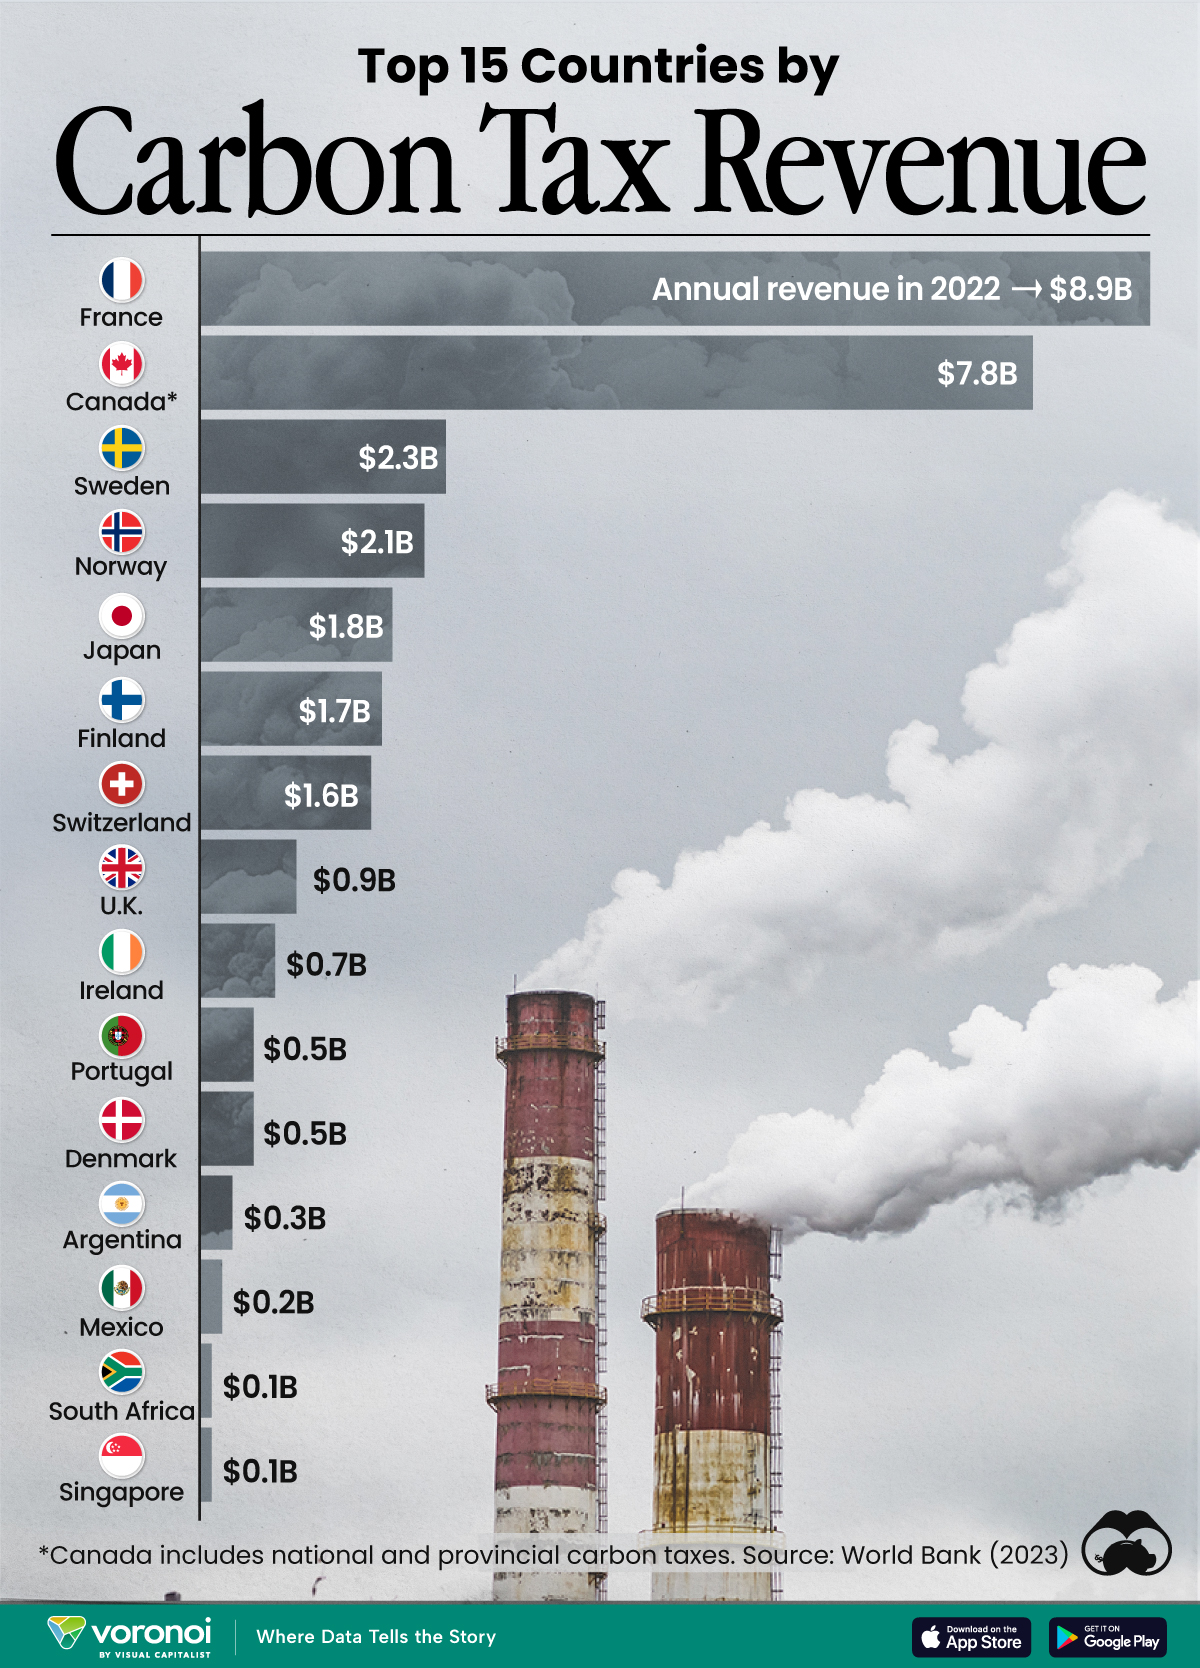 A chart showing the top 15 countries by carbon tax revenue.